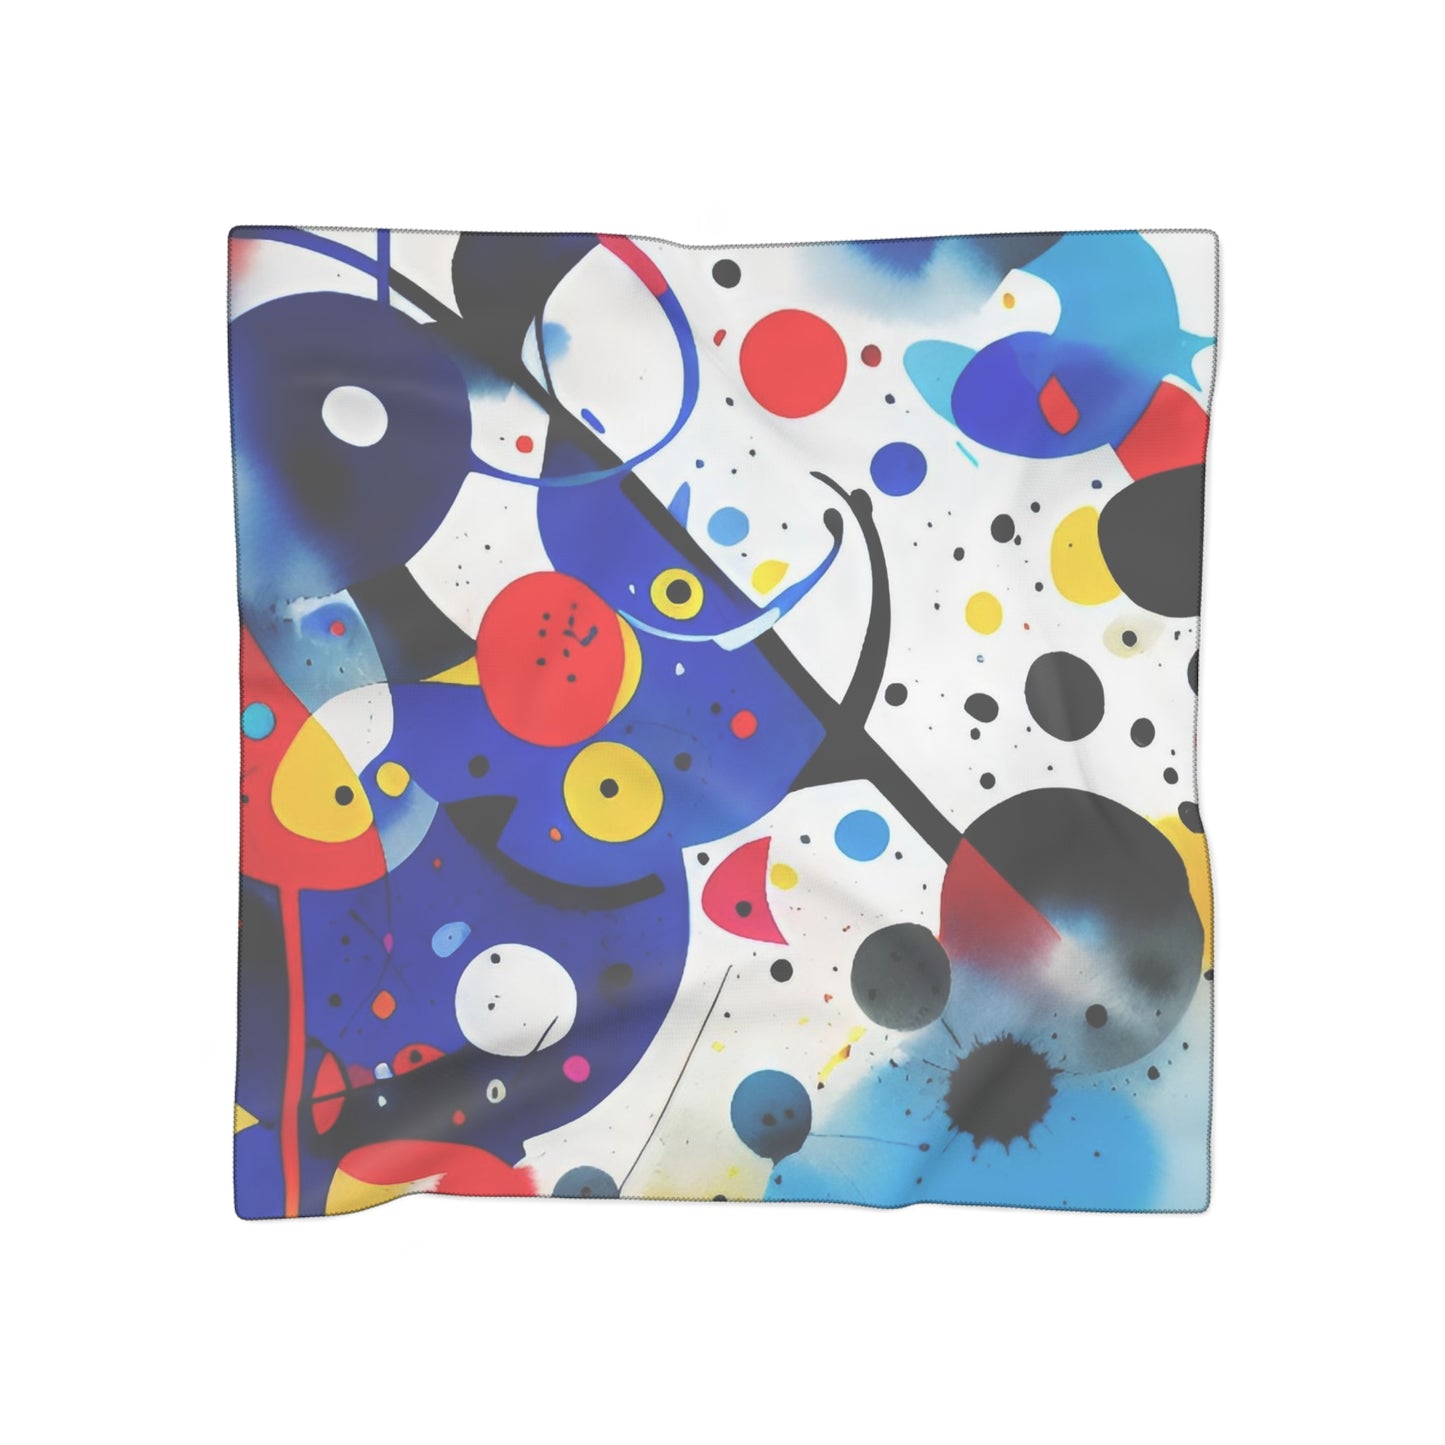 Poly Scarf, Inspired by Miro